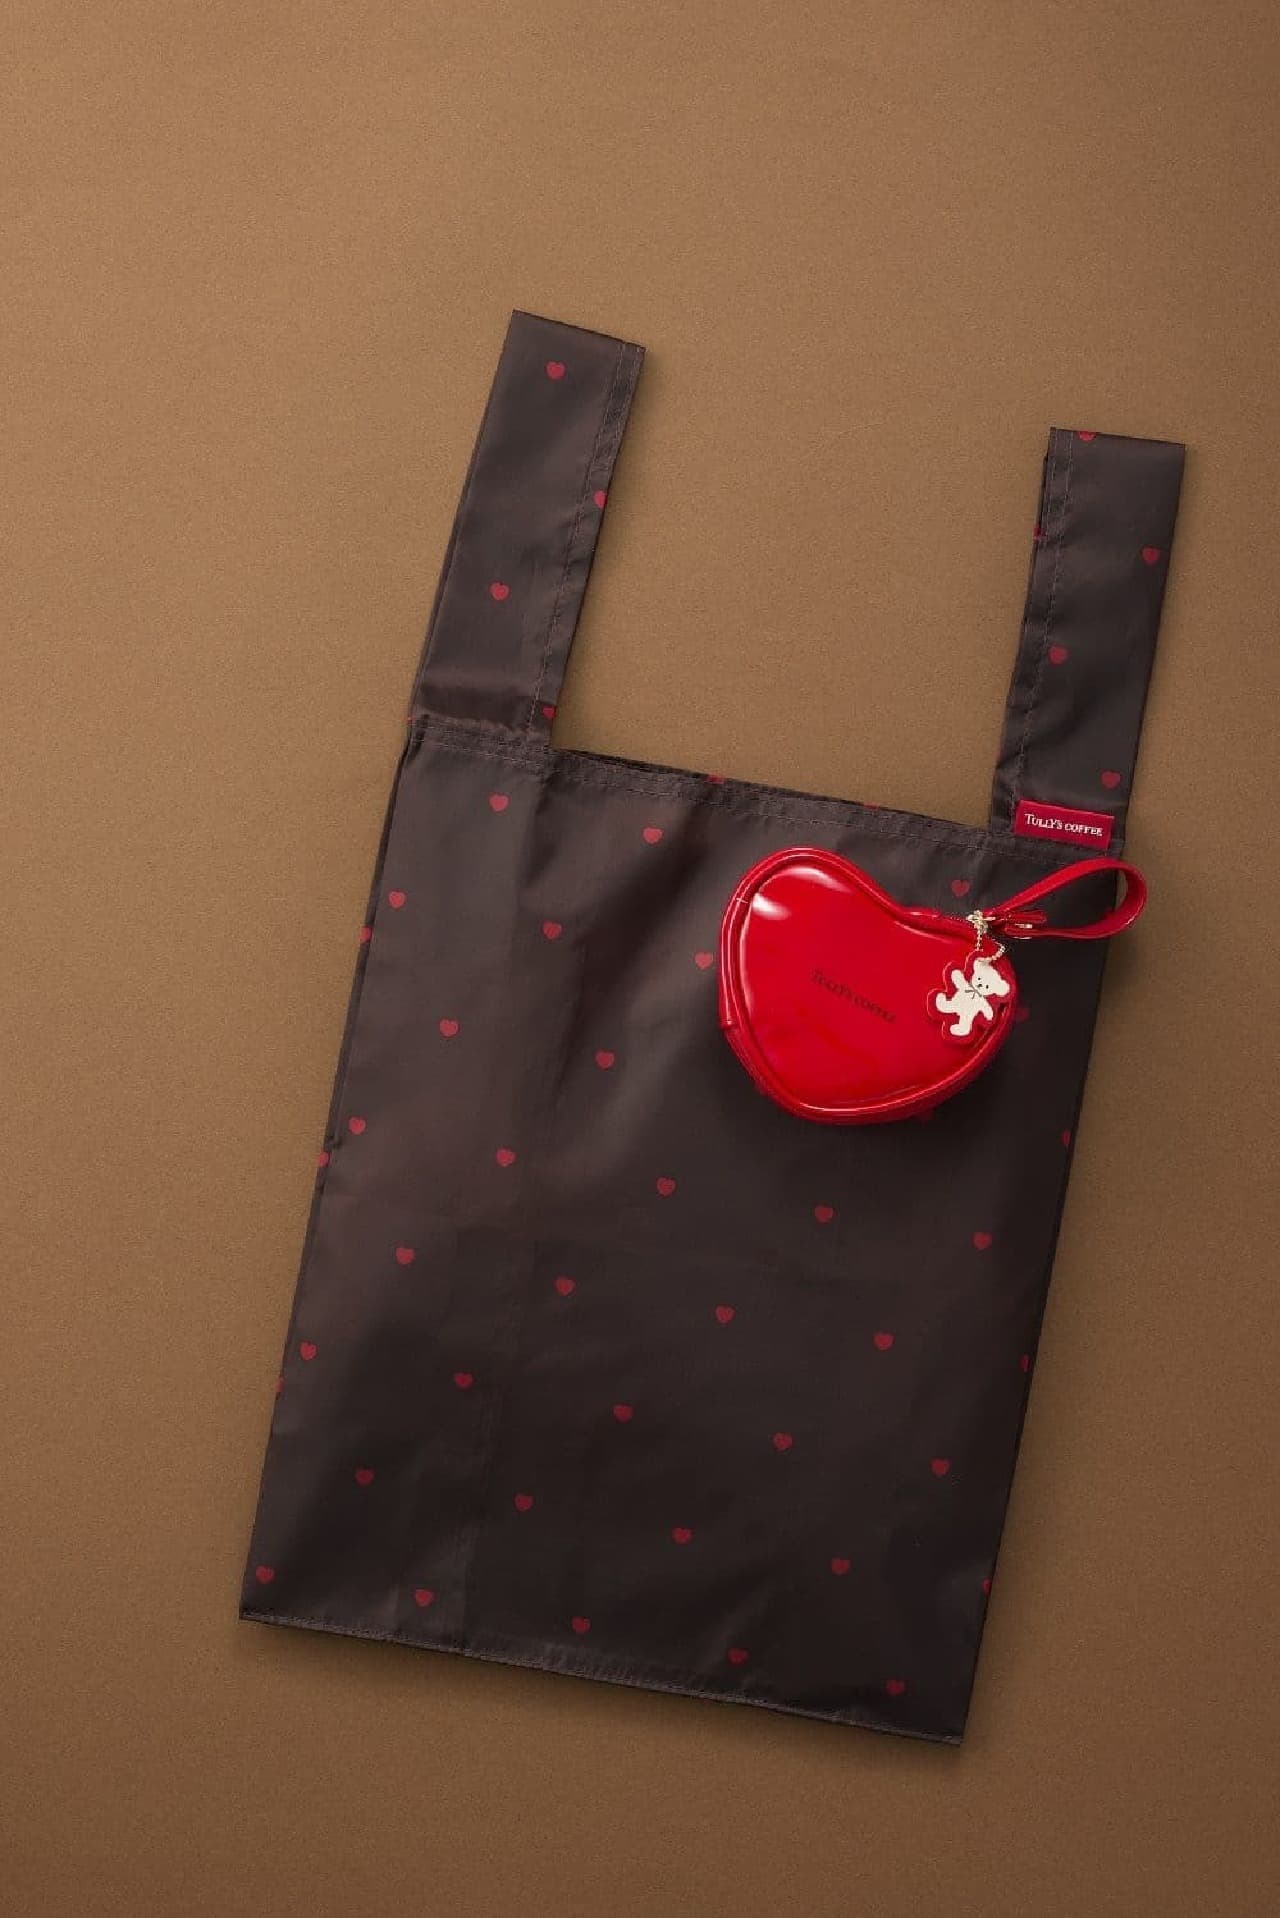 Tully's Coffee "Bearful Heart Pouch & ECO Bag (Red)